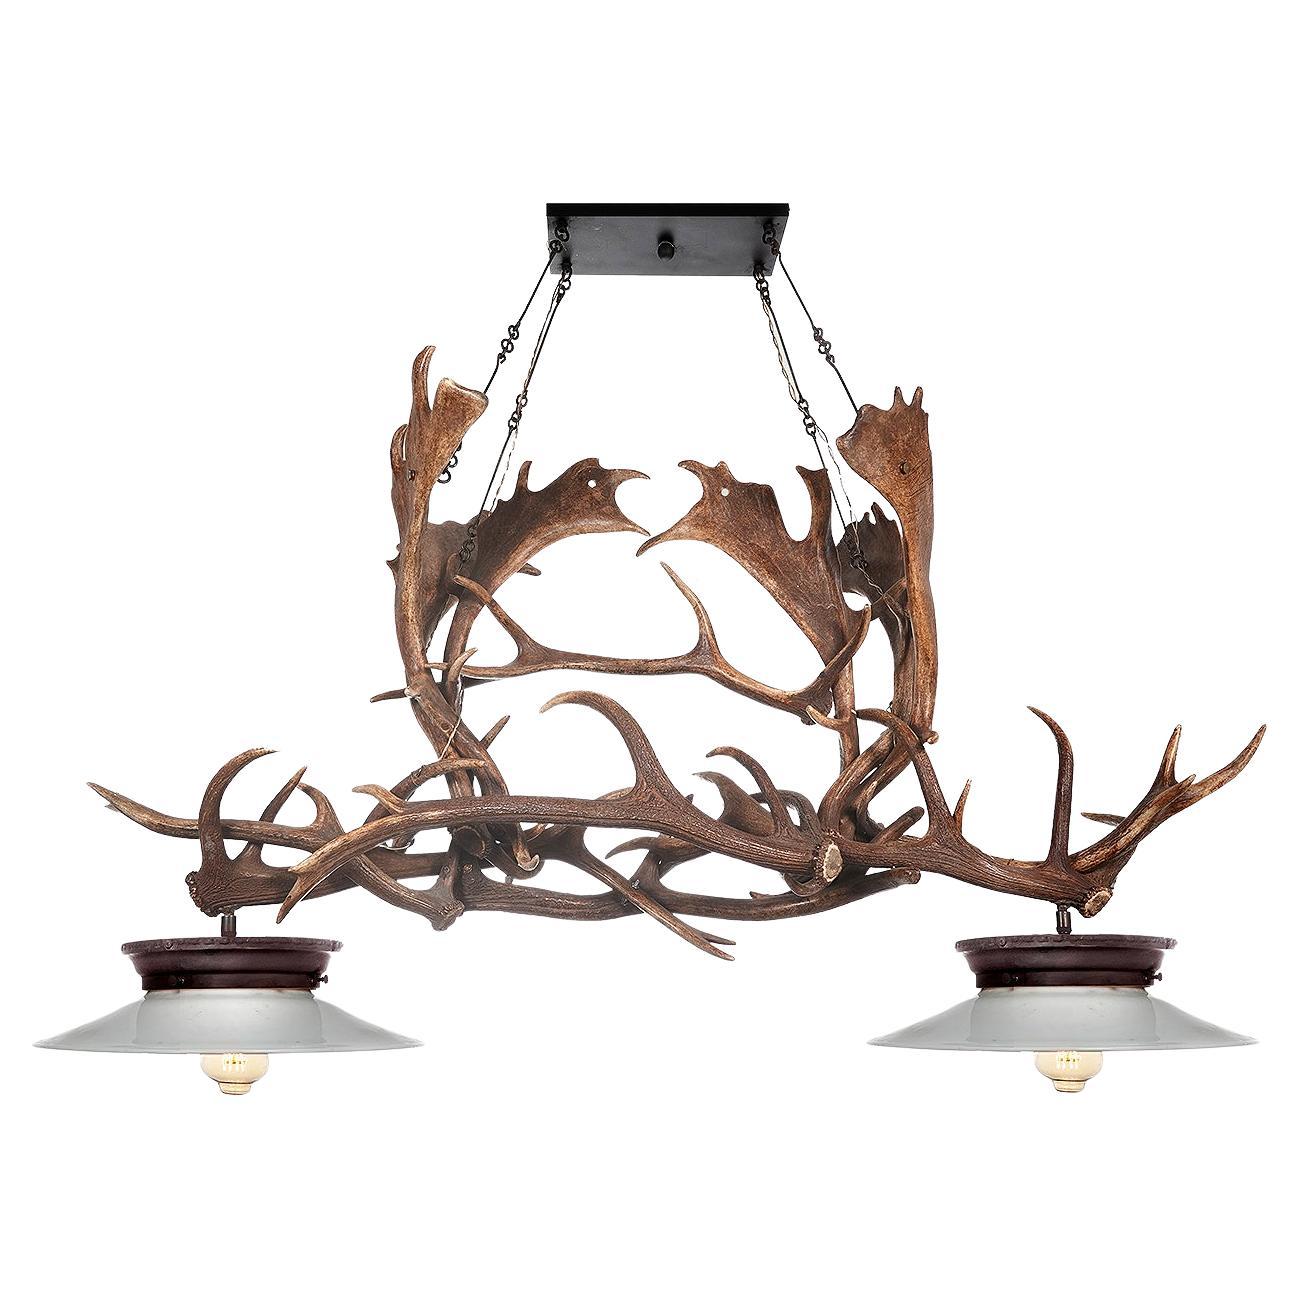 Dramatic Adirondack Great Camp Style Horned Chandelier